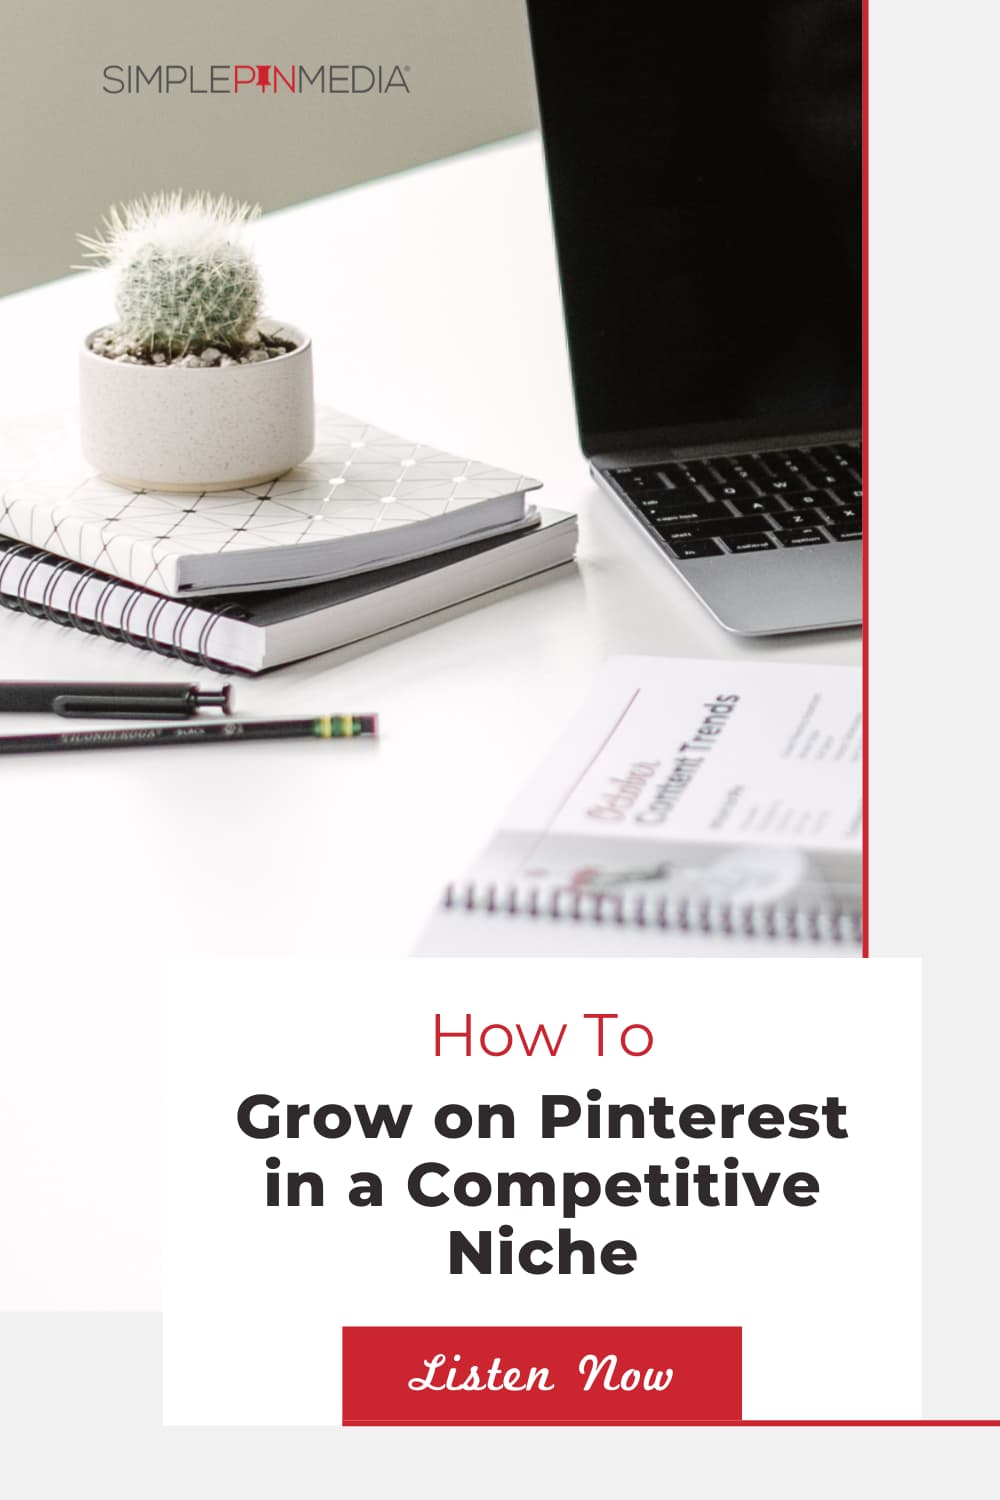 302 – How to Grow on Pinterest